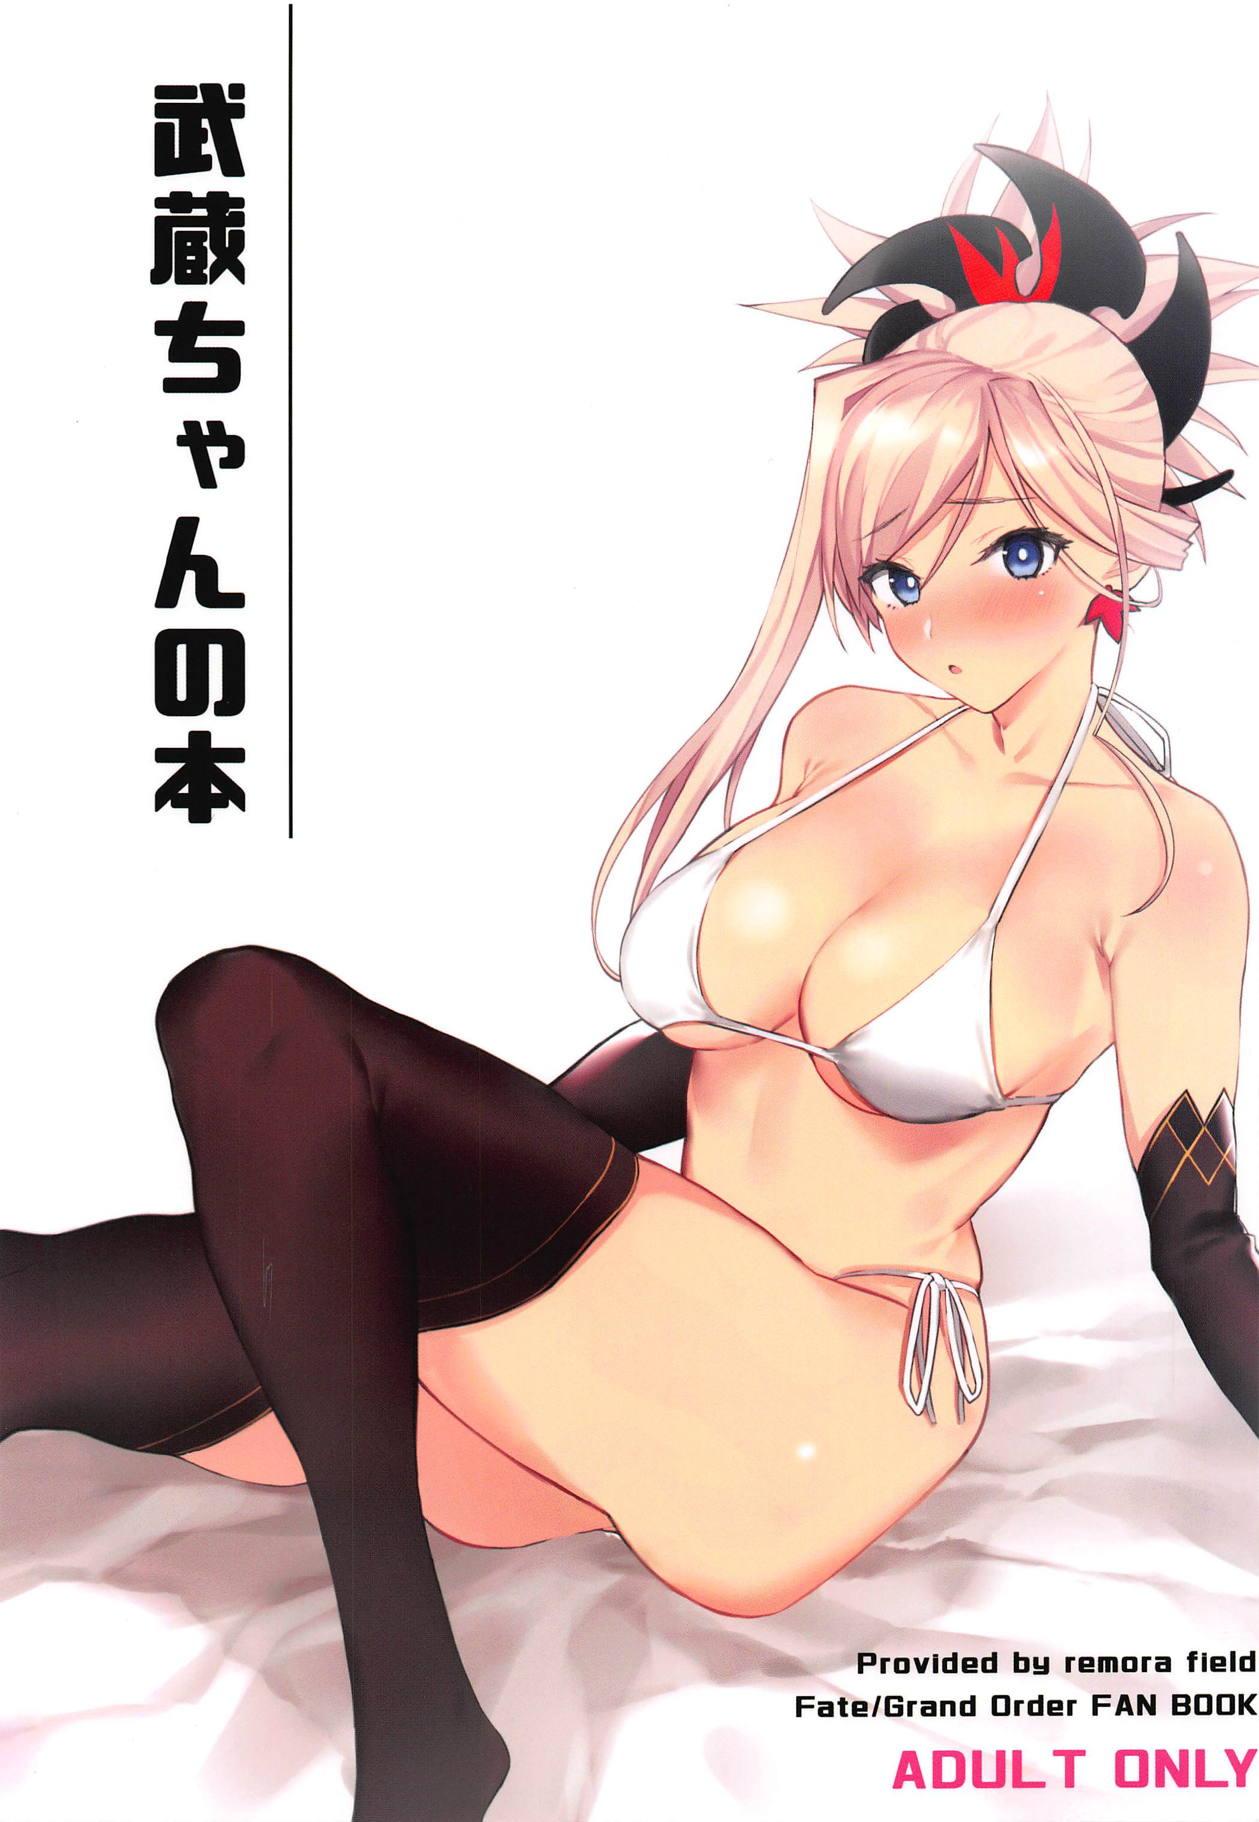 Scandal Musashi-chan no Hon - Fate grand order Emo - Picture 1